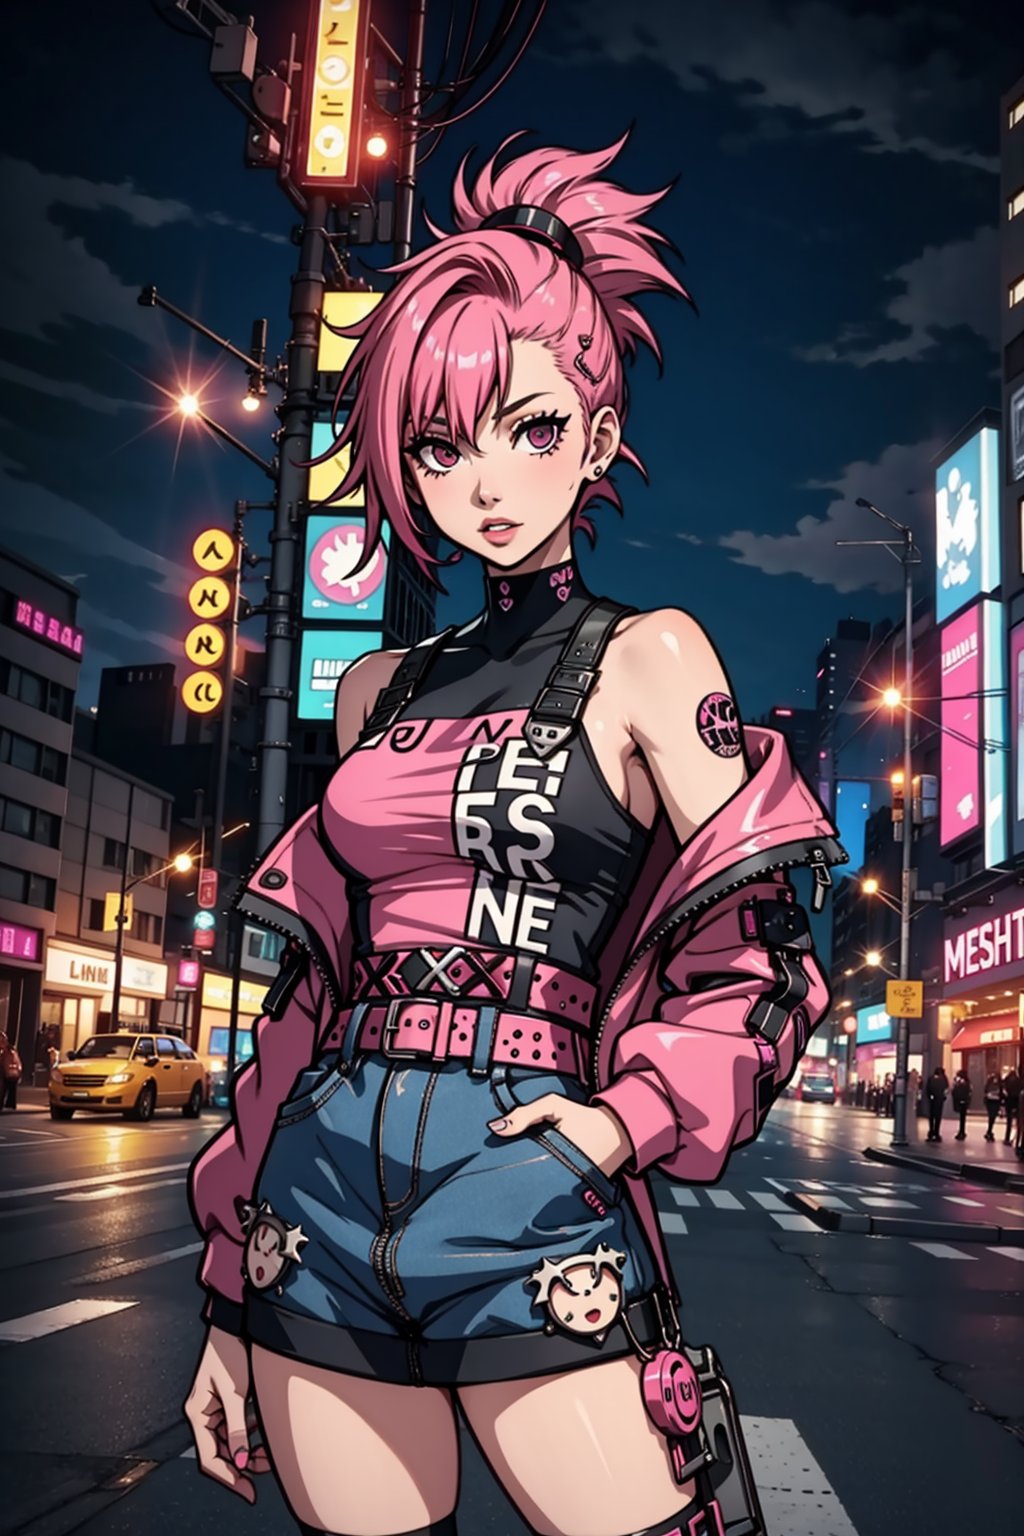 masterpiece,best quality,punk girl with pink mohawk hair, blurred night city background